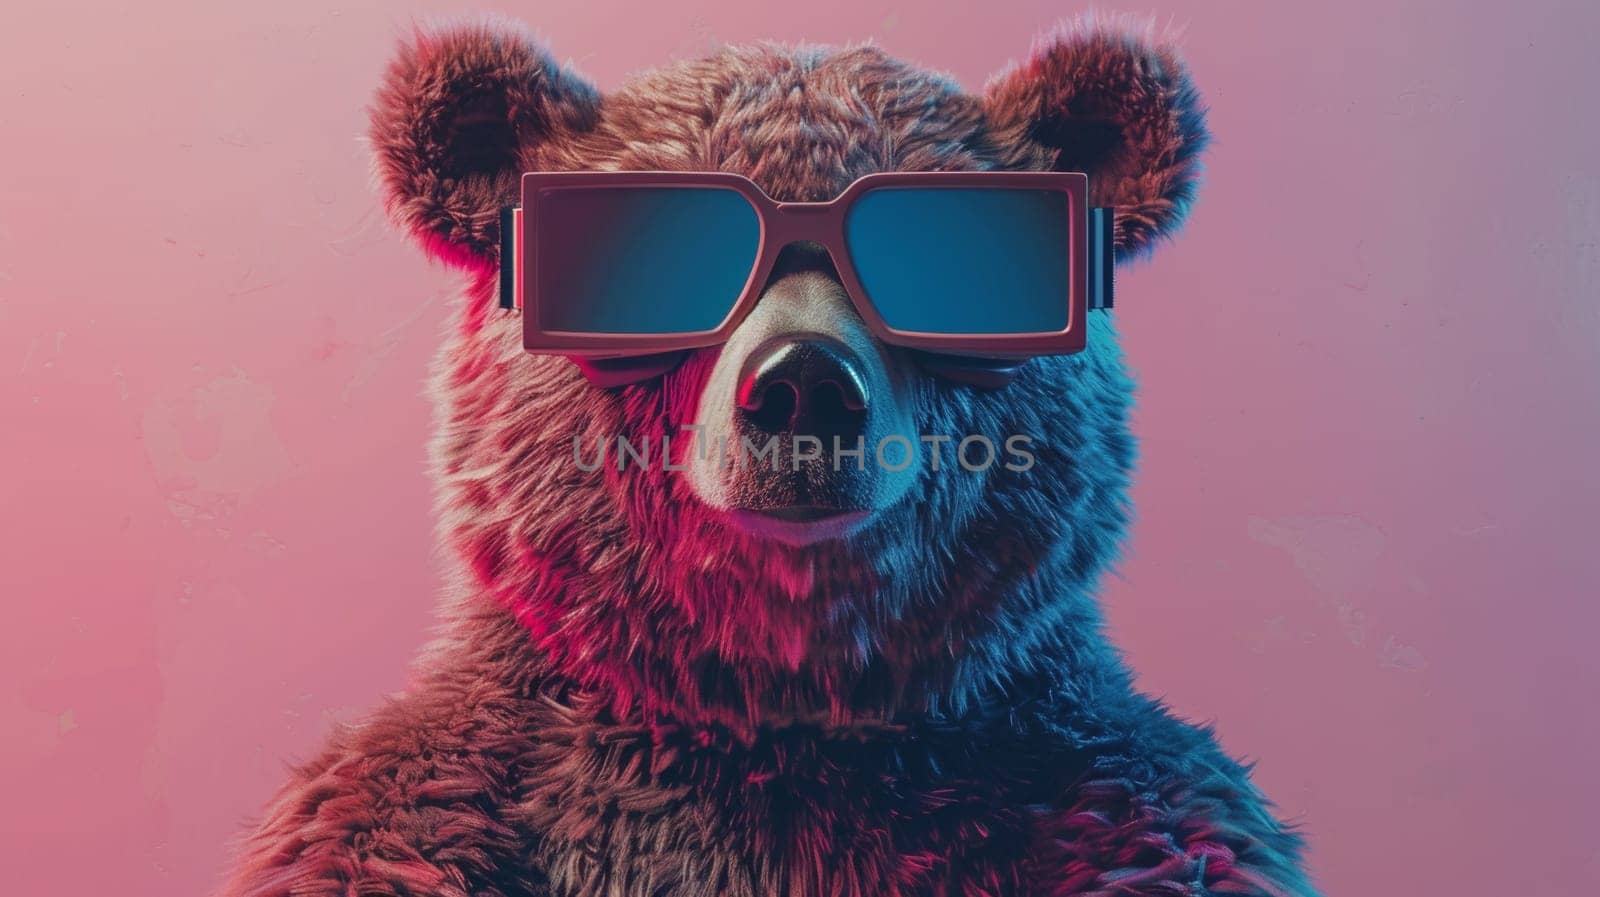 A bear wearing sunglasses with a pink background and red filter